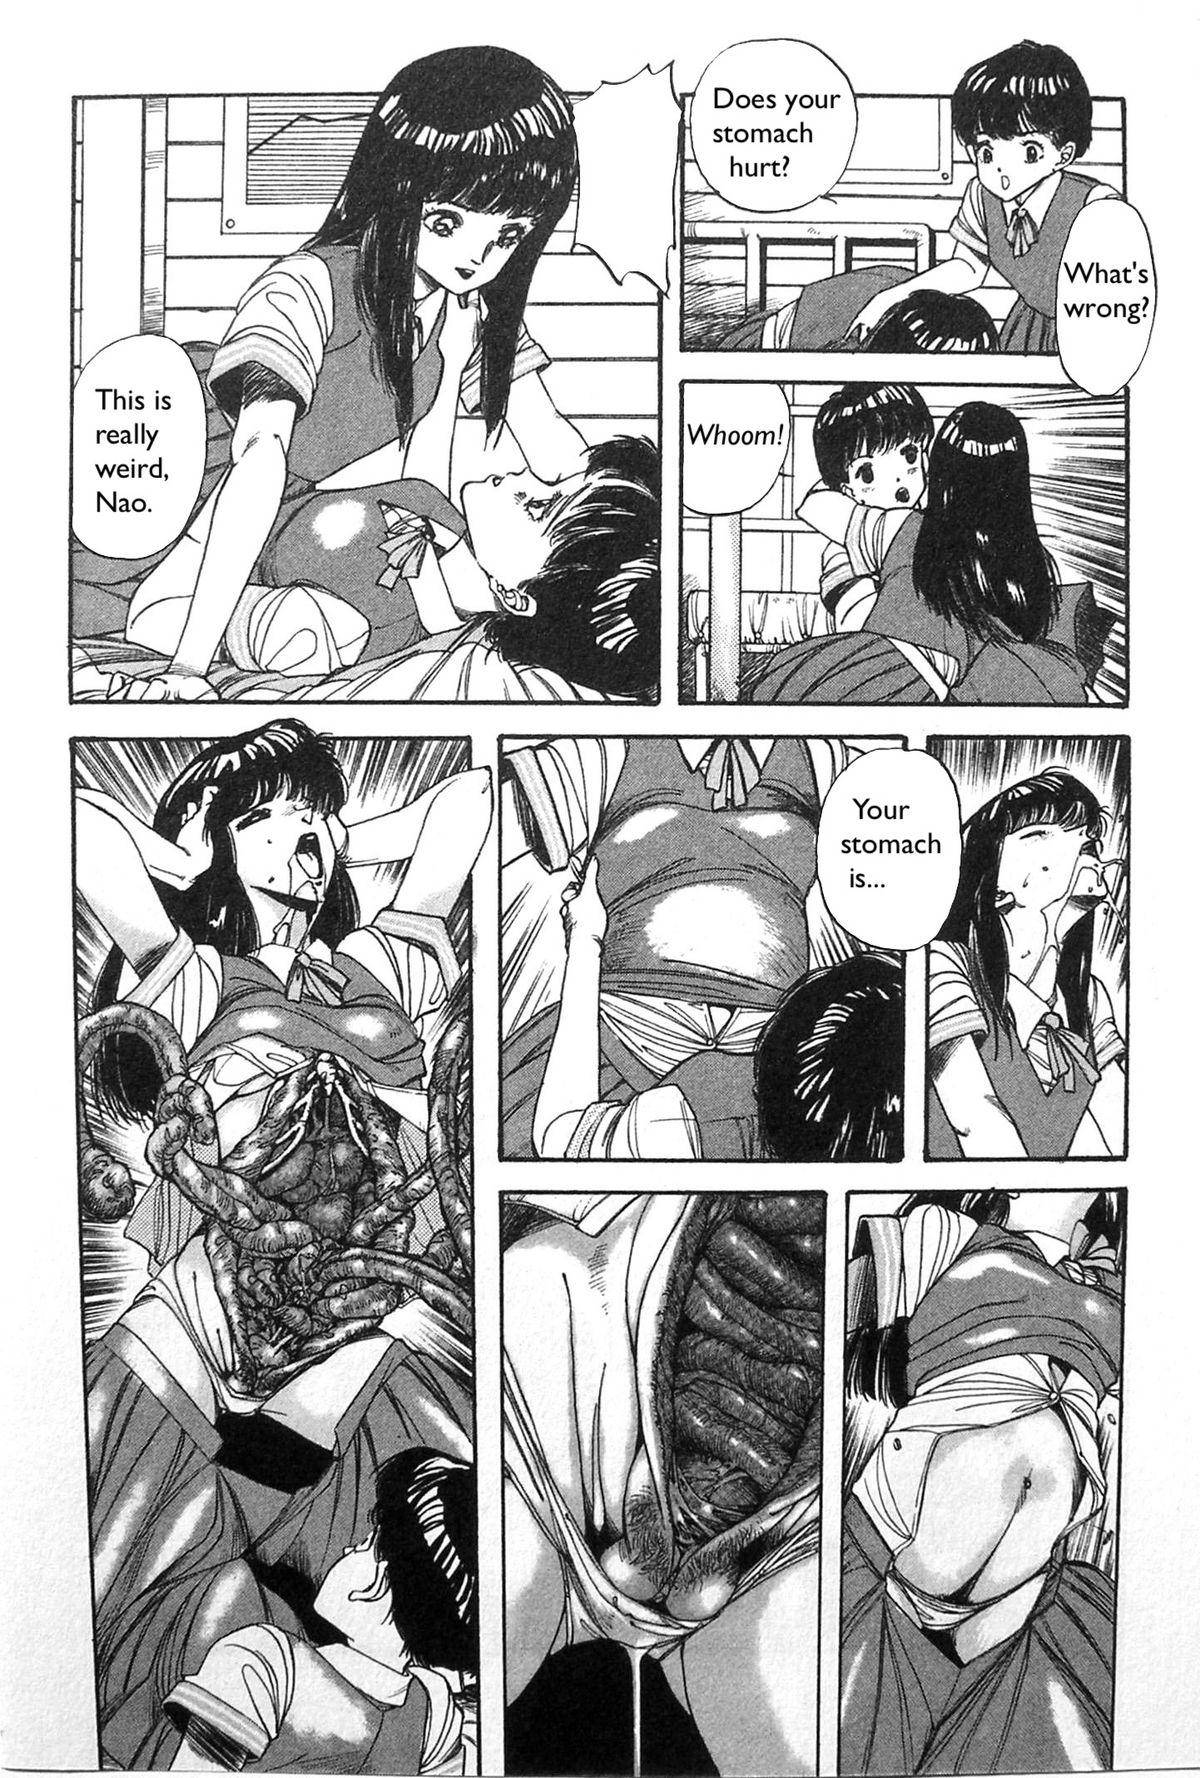 Cop Himei-Saka Slope of the Scream | Screaming Hill Inked - Page 8